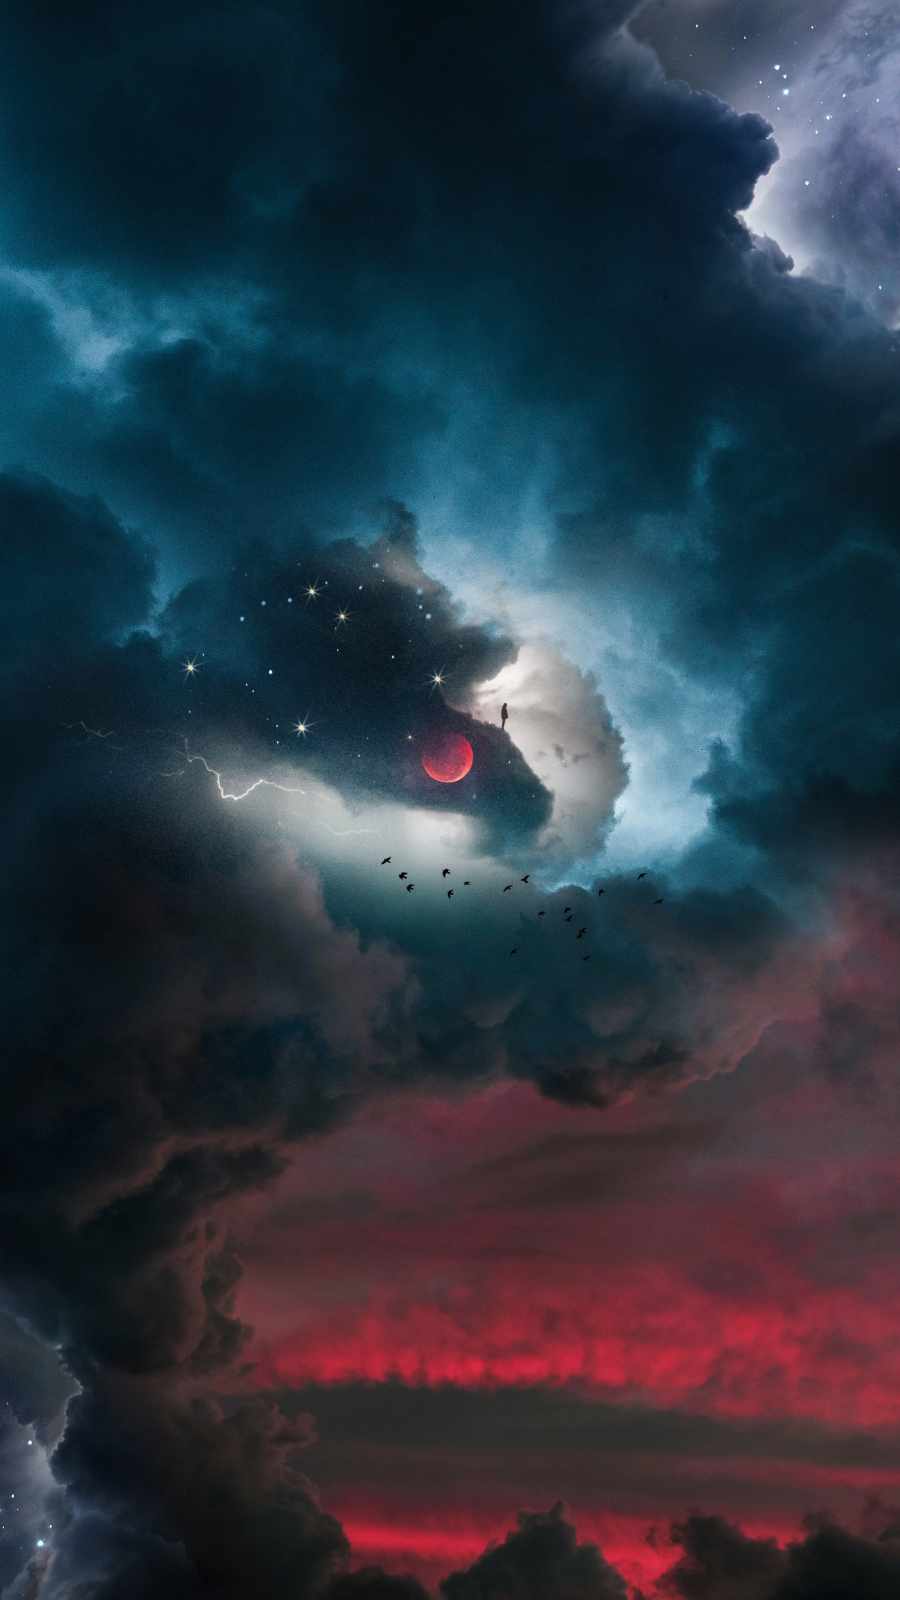 Moon in Clouds iPhone Wallpaper